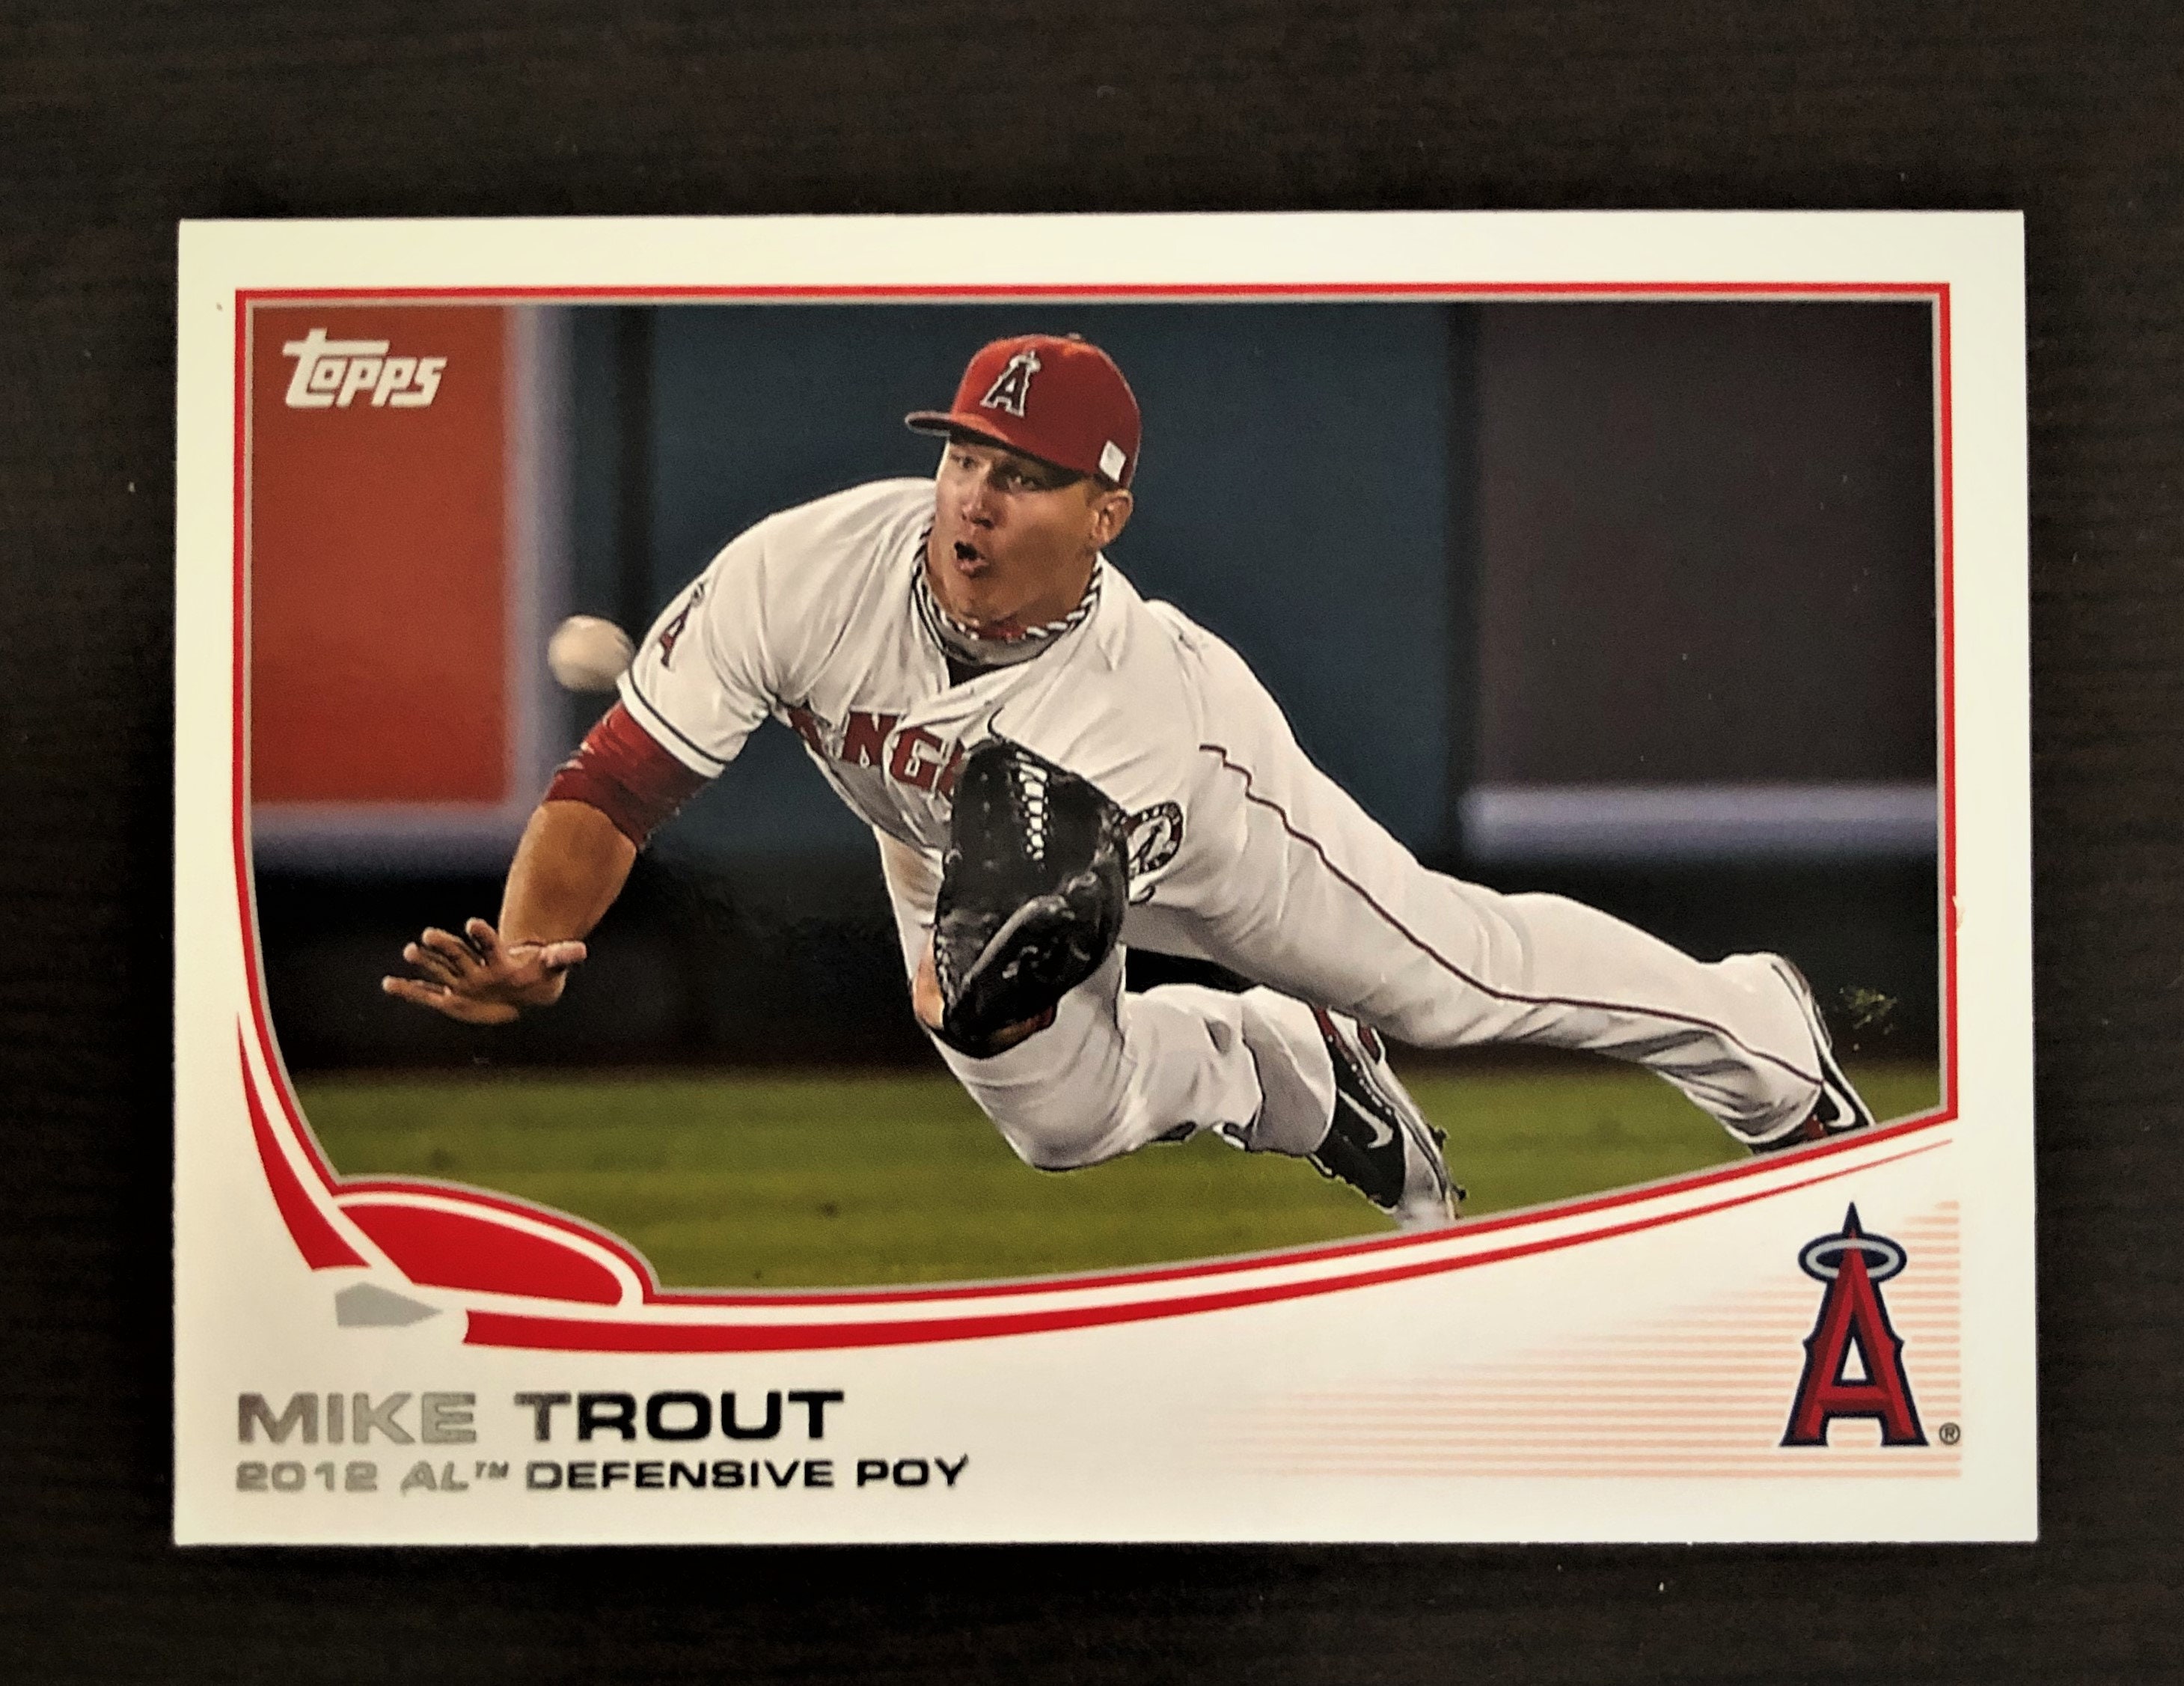 2013 Topps AL Rookie of the Year Mike Trout 